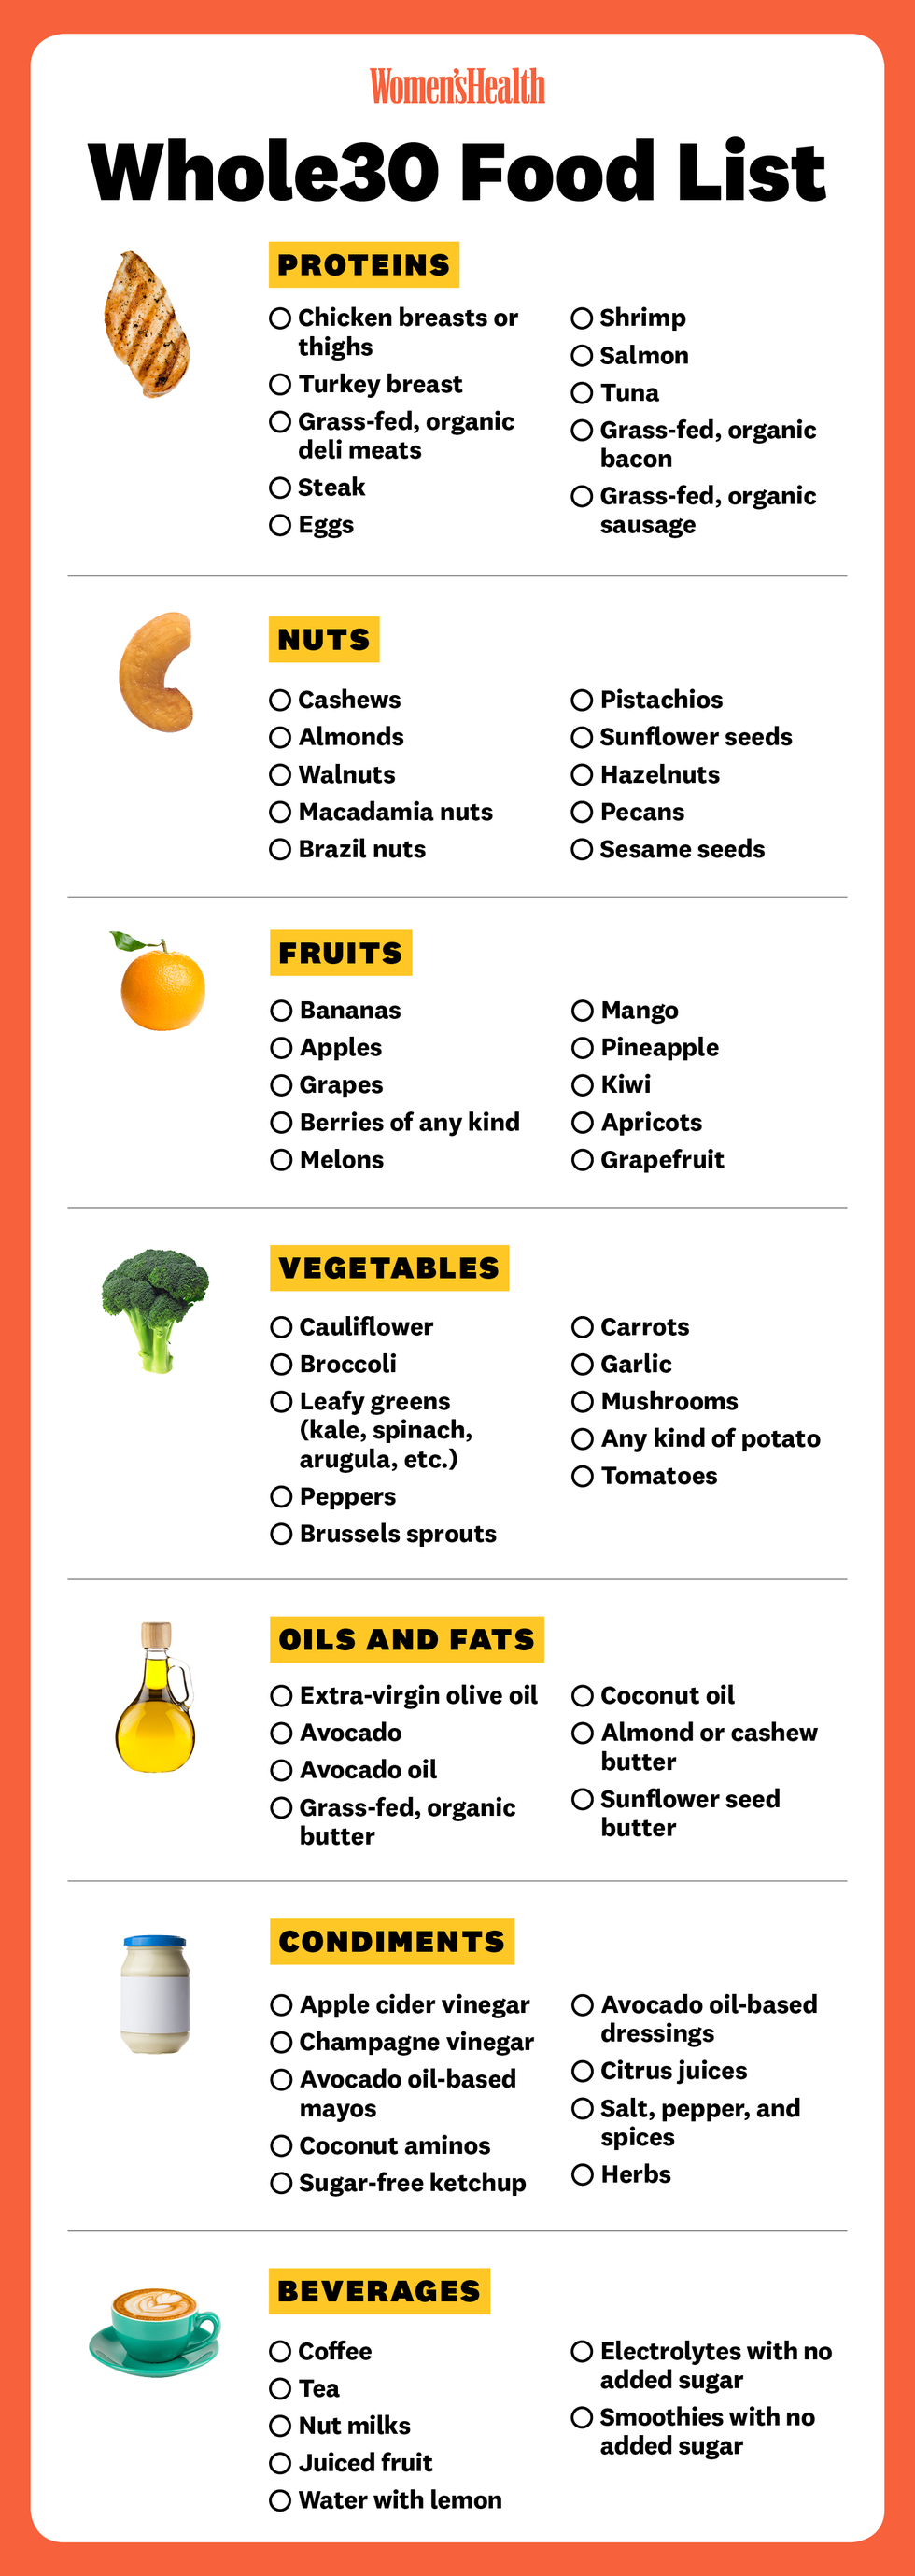 Whole30 Shopping List - Beginner's Guide To Groceries On The Diet